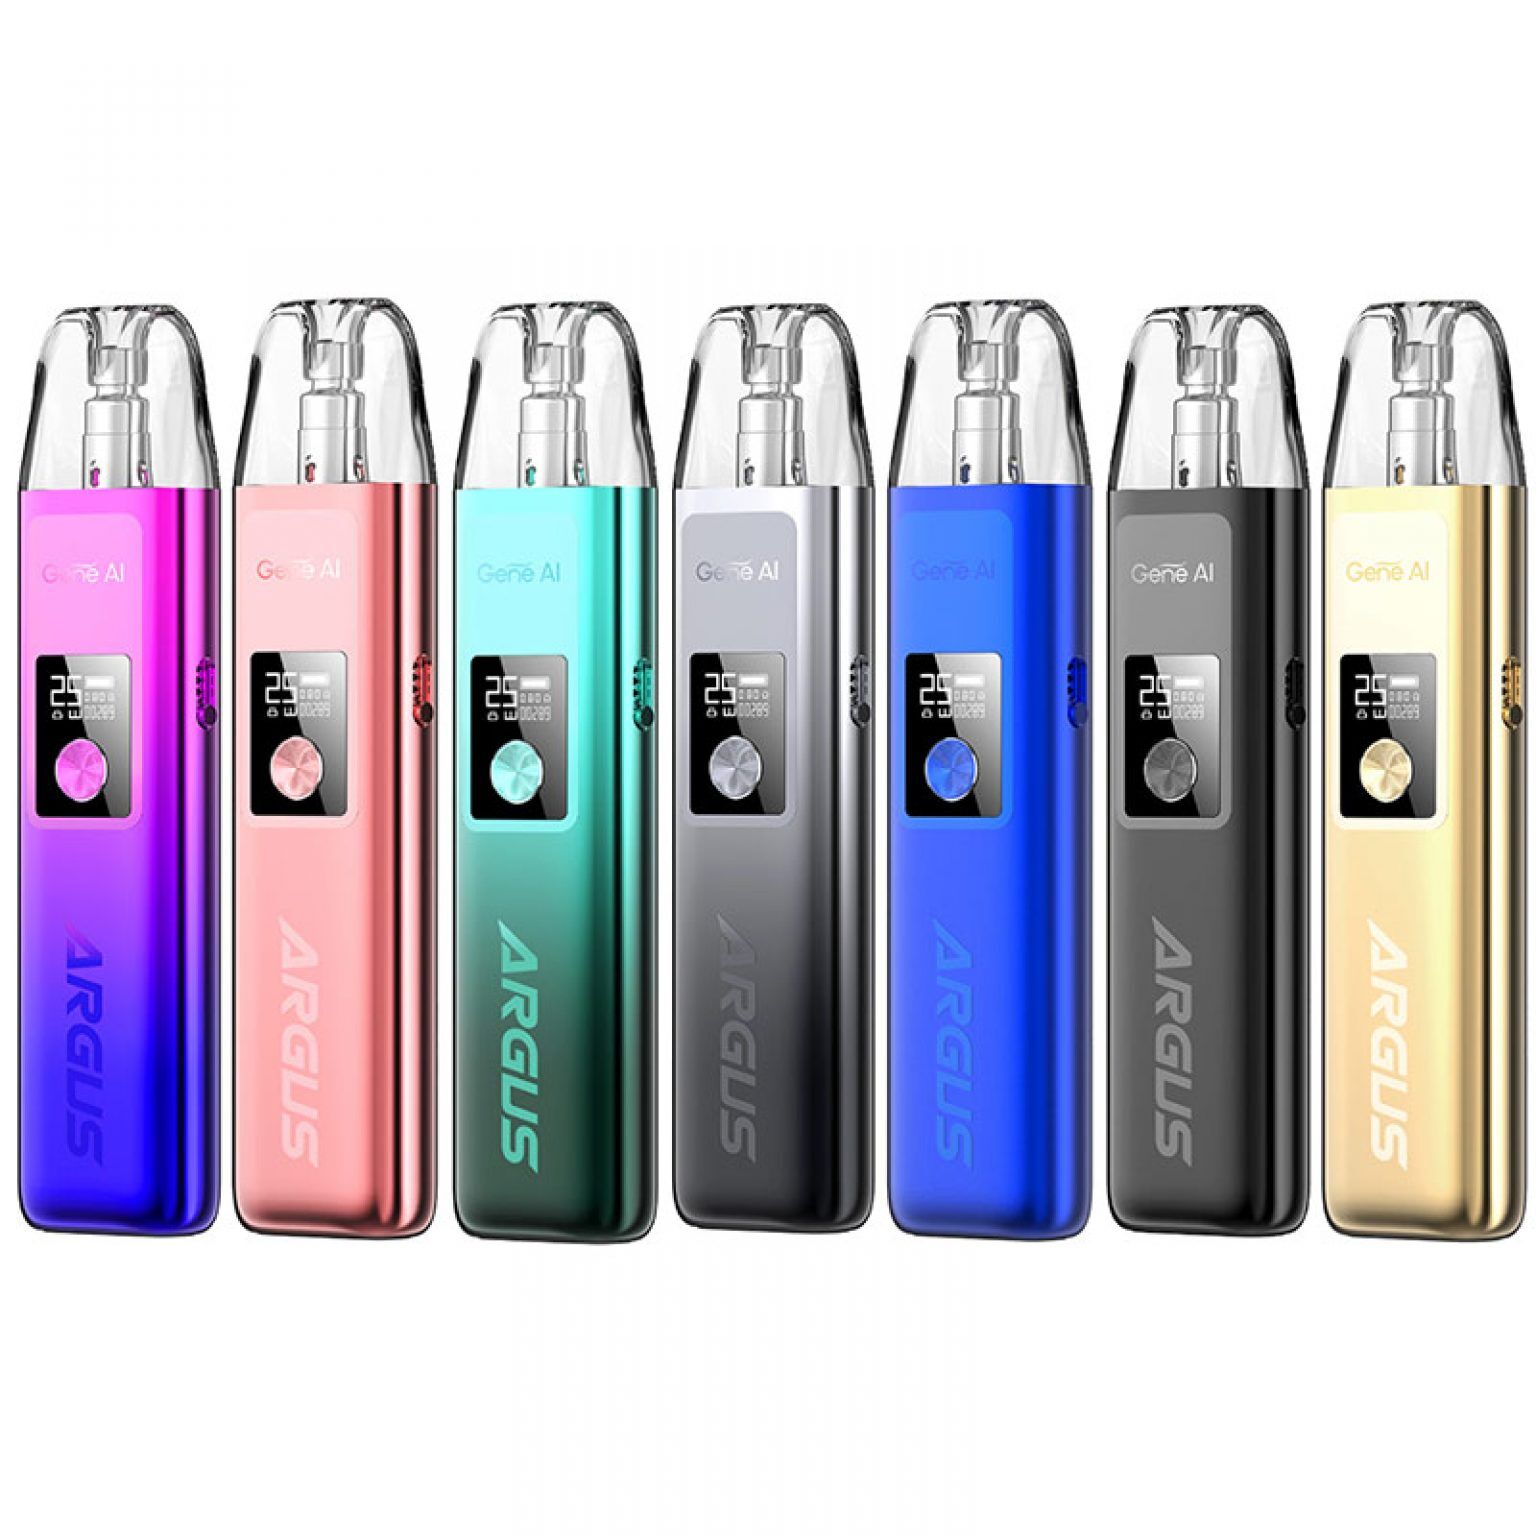 voopoo-argus-g-pod-kit-25w-vapes-near-uk-made-special-offer-vaping-products